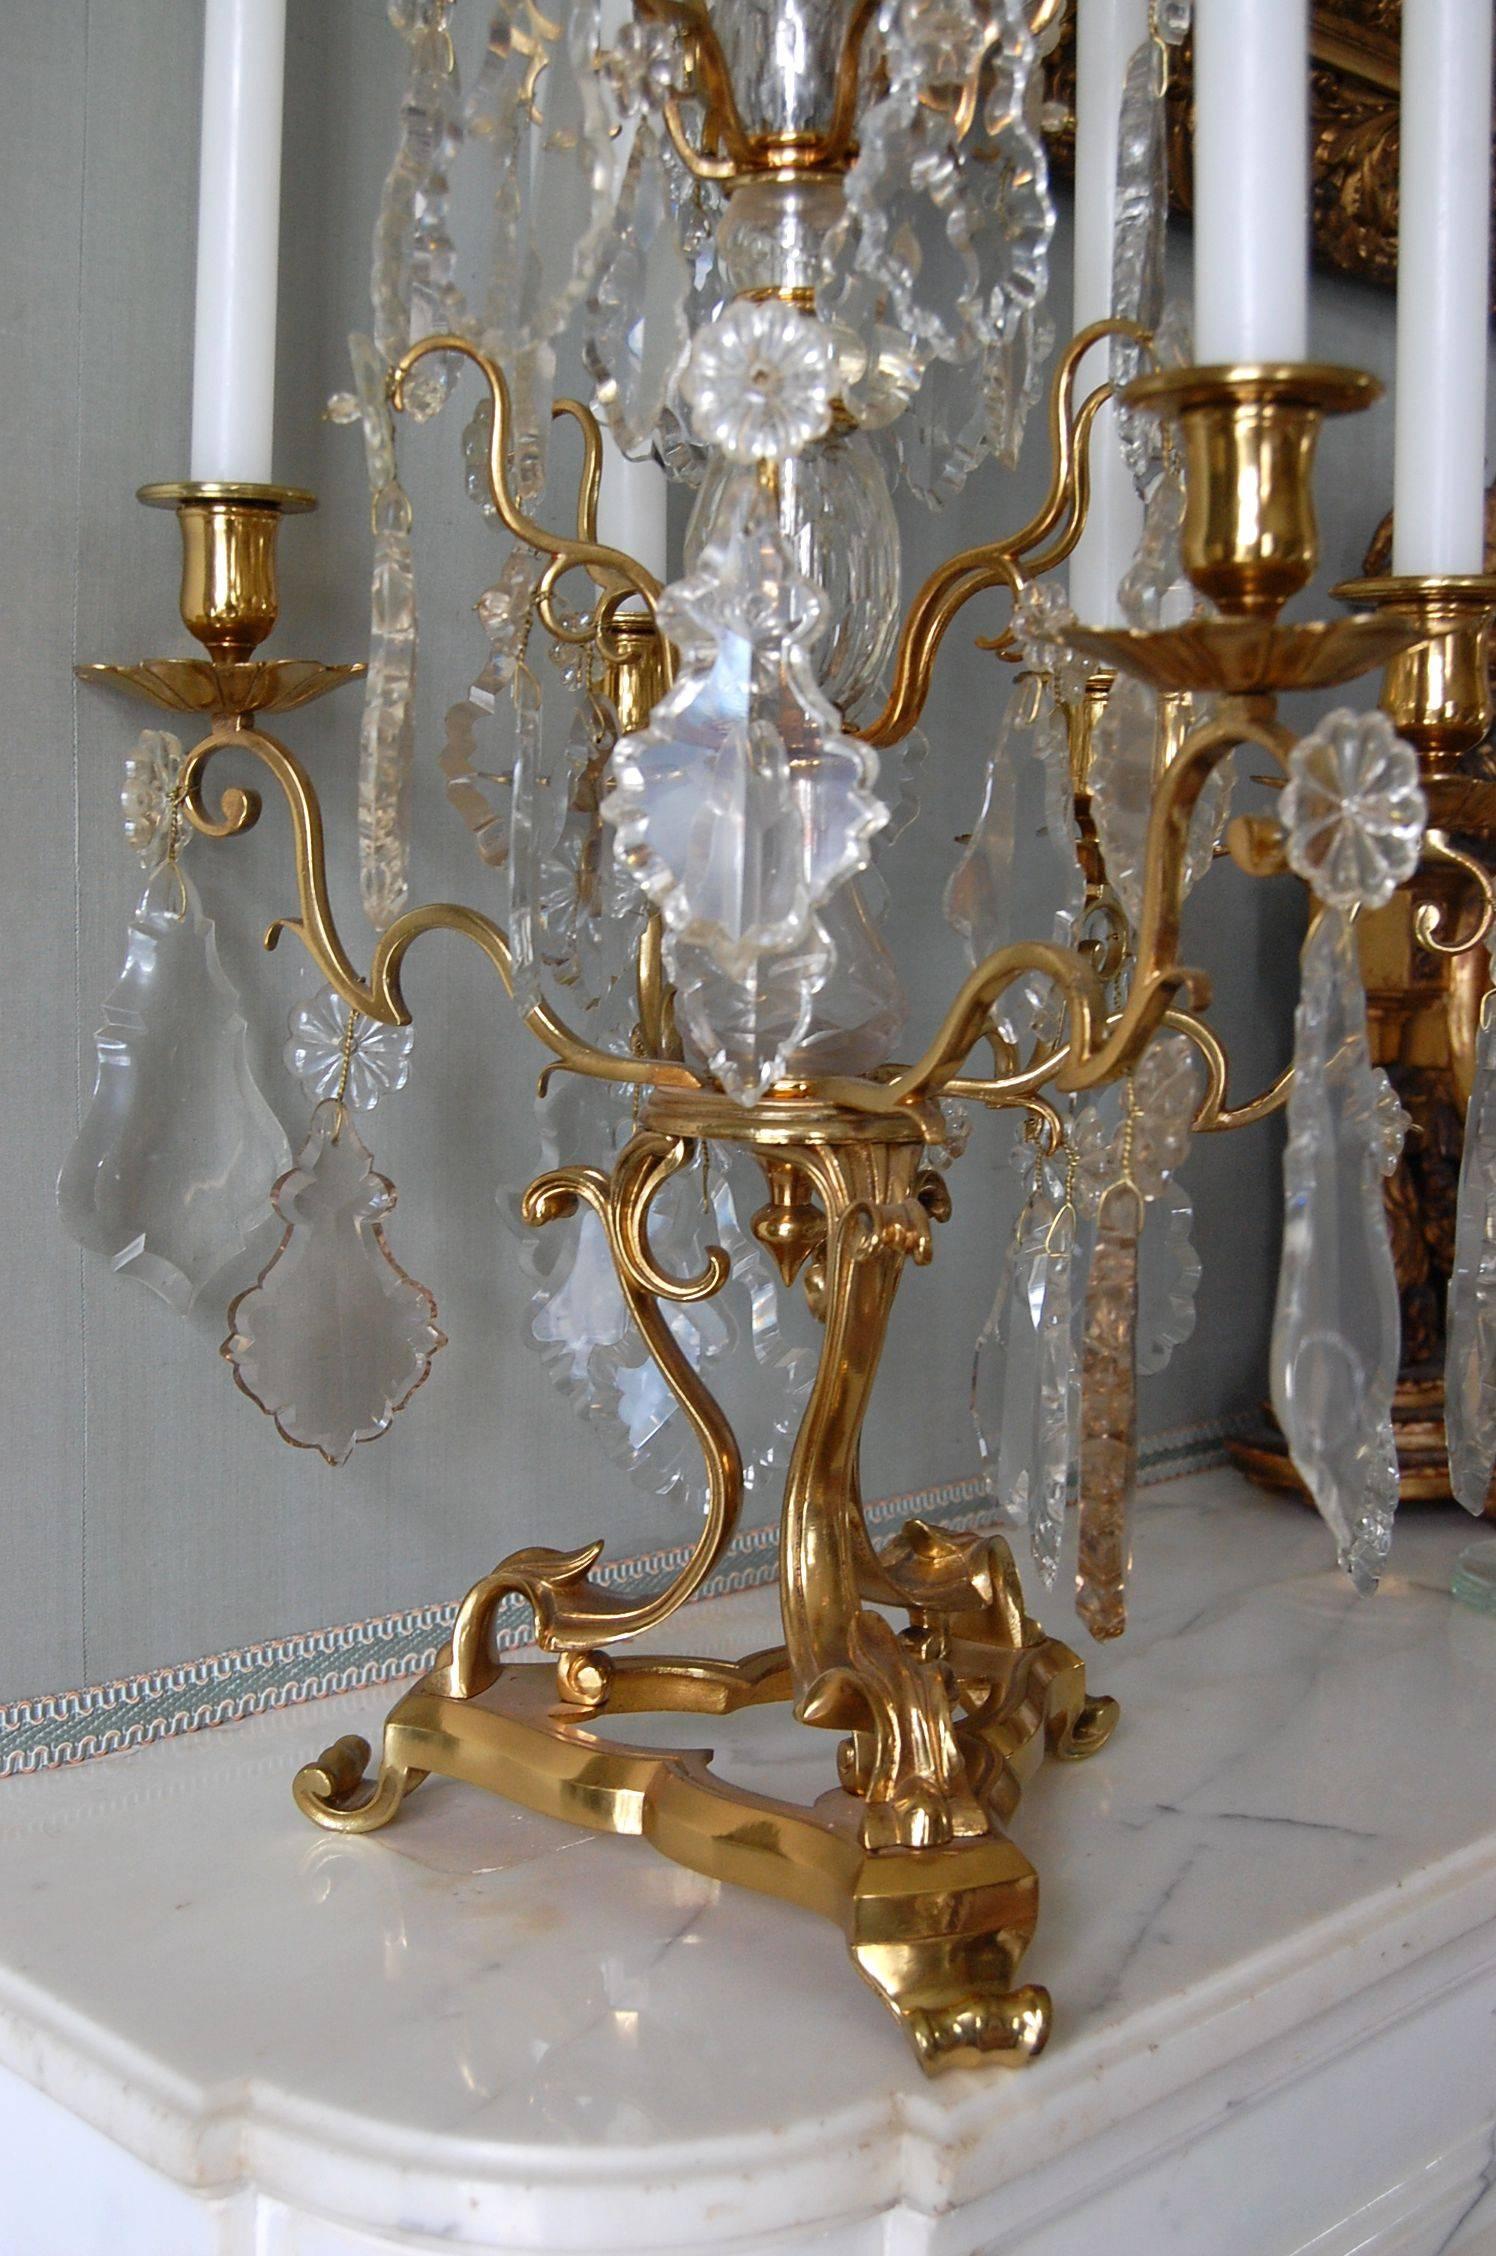 19th Century Monumental Pair of Antique French Gilt Bronze and Crystal Girandole Candelabra